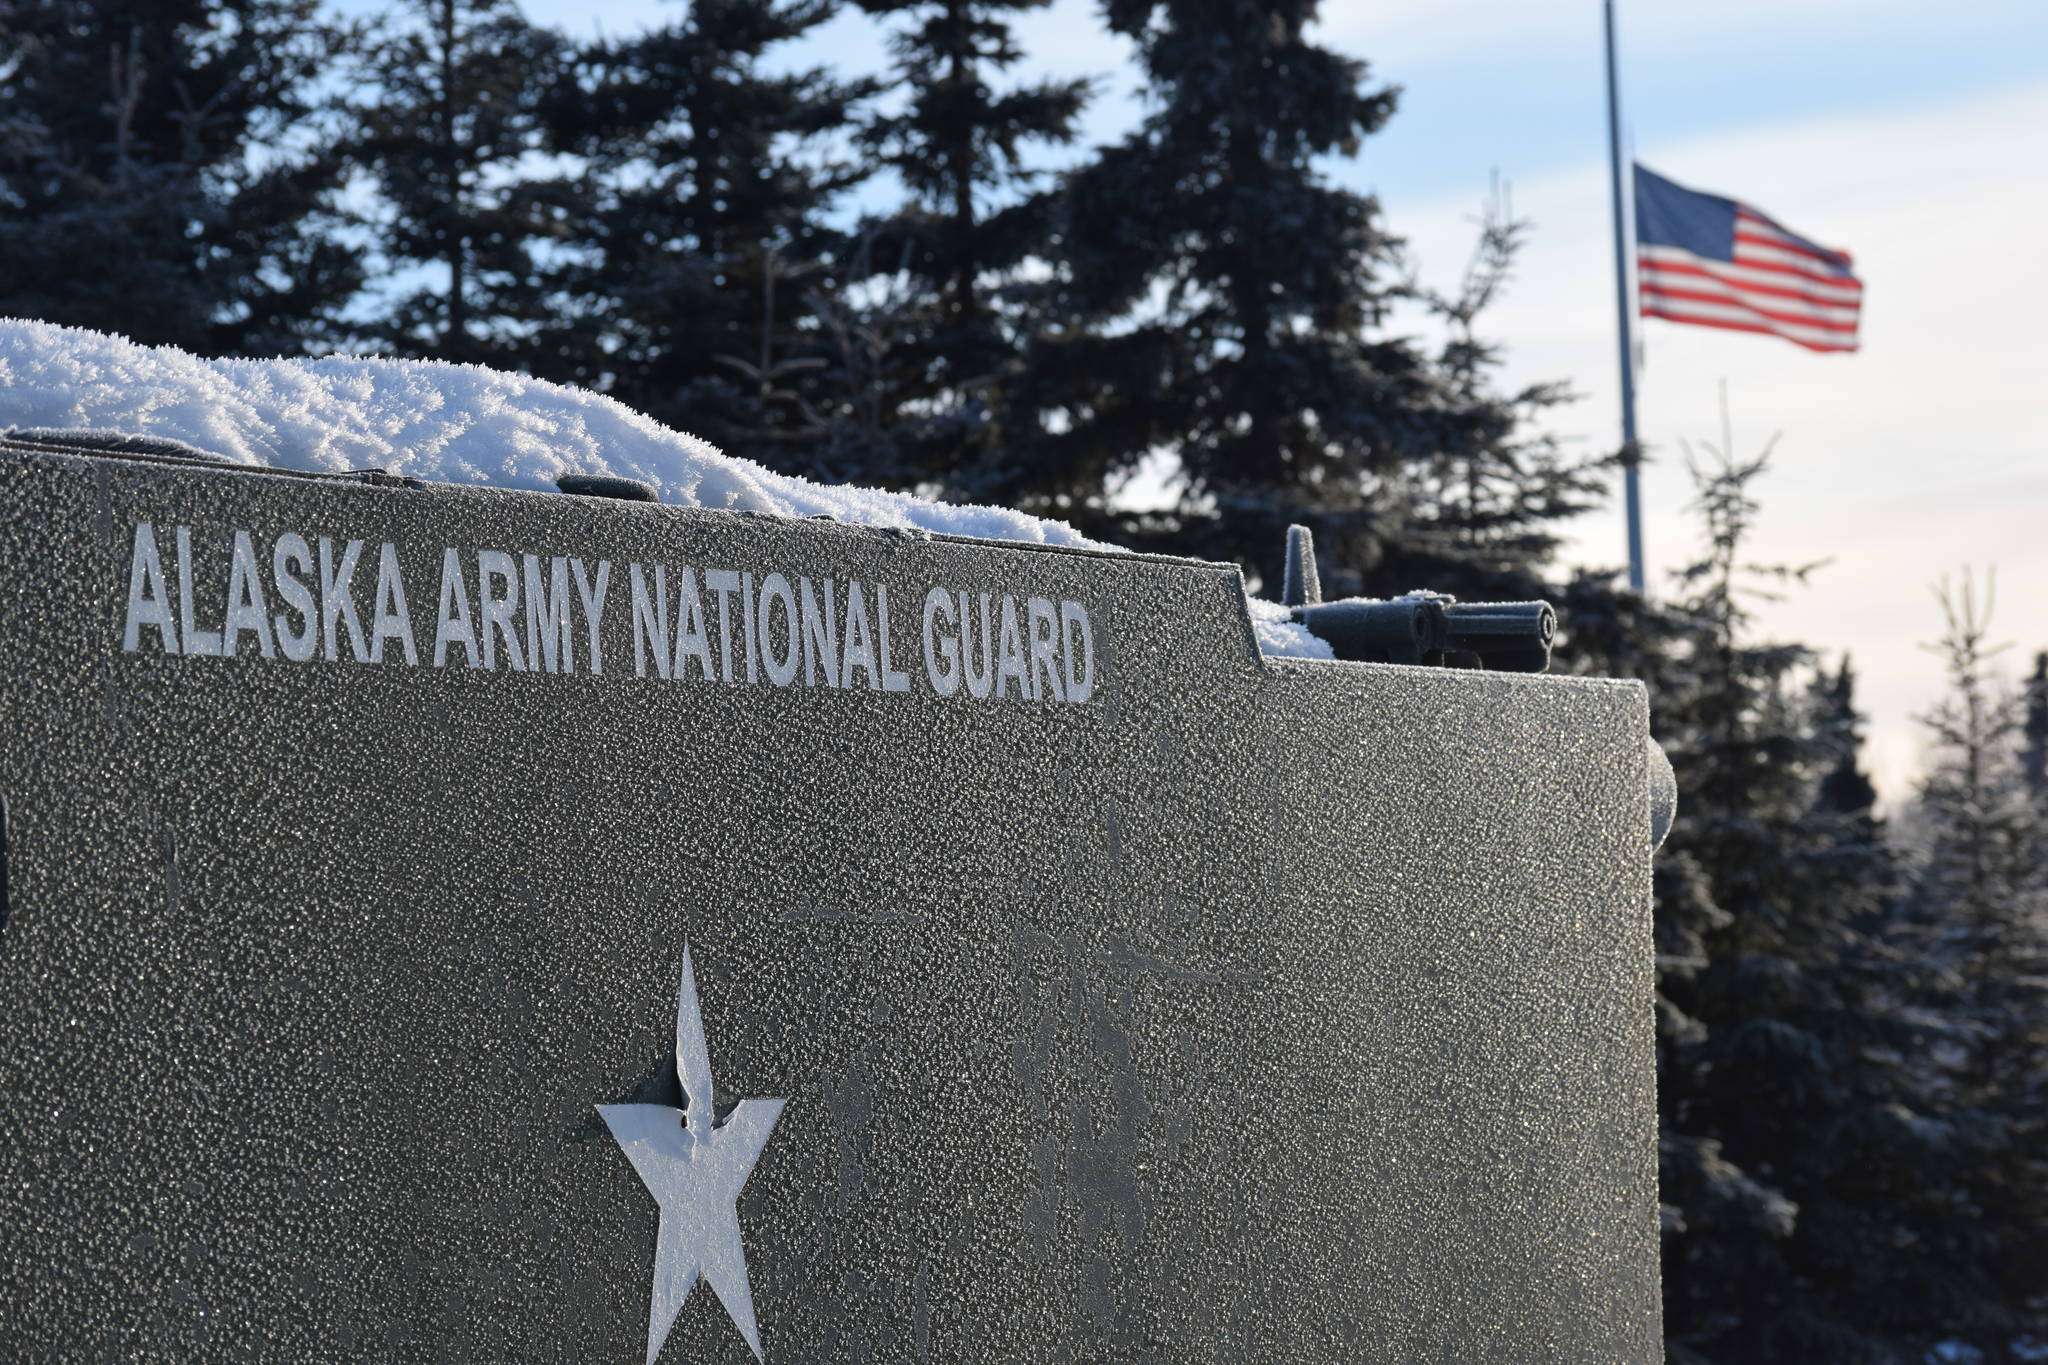 A tank outside the Kenai Readiness Center for the Alaska Army National Guard sits with a covering of snow on Friday. (Photo by Brian Mazurek/Peninsula Clarion)